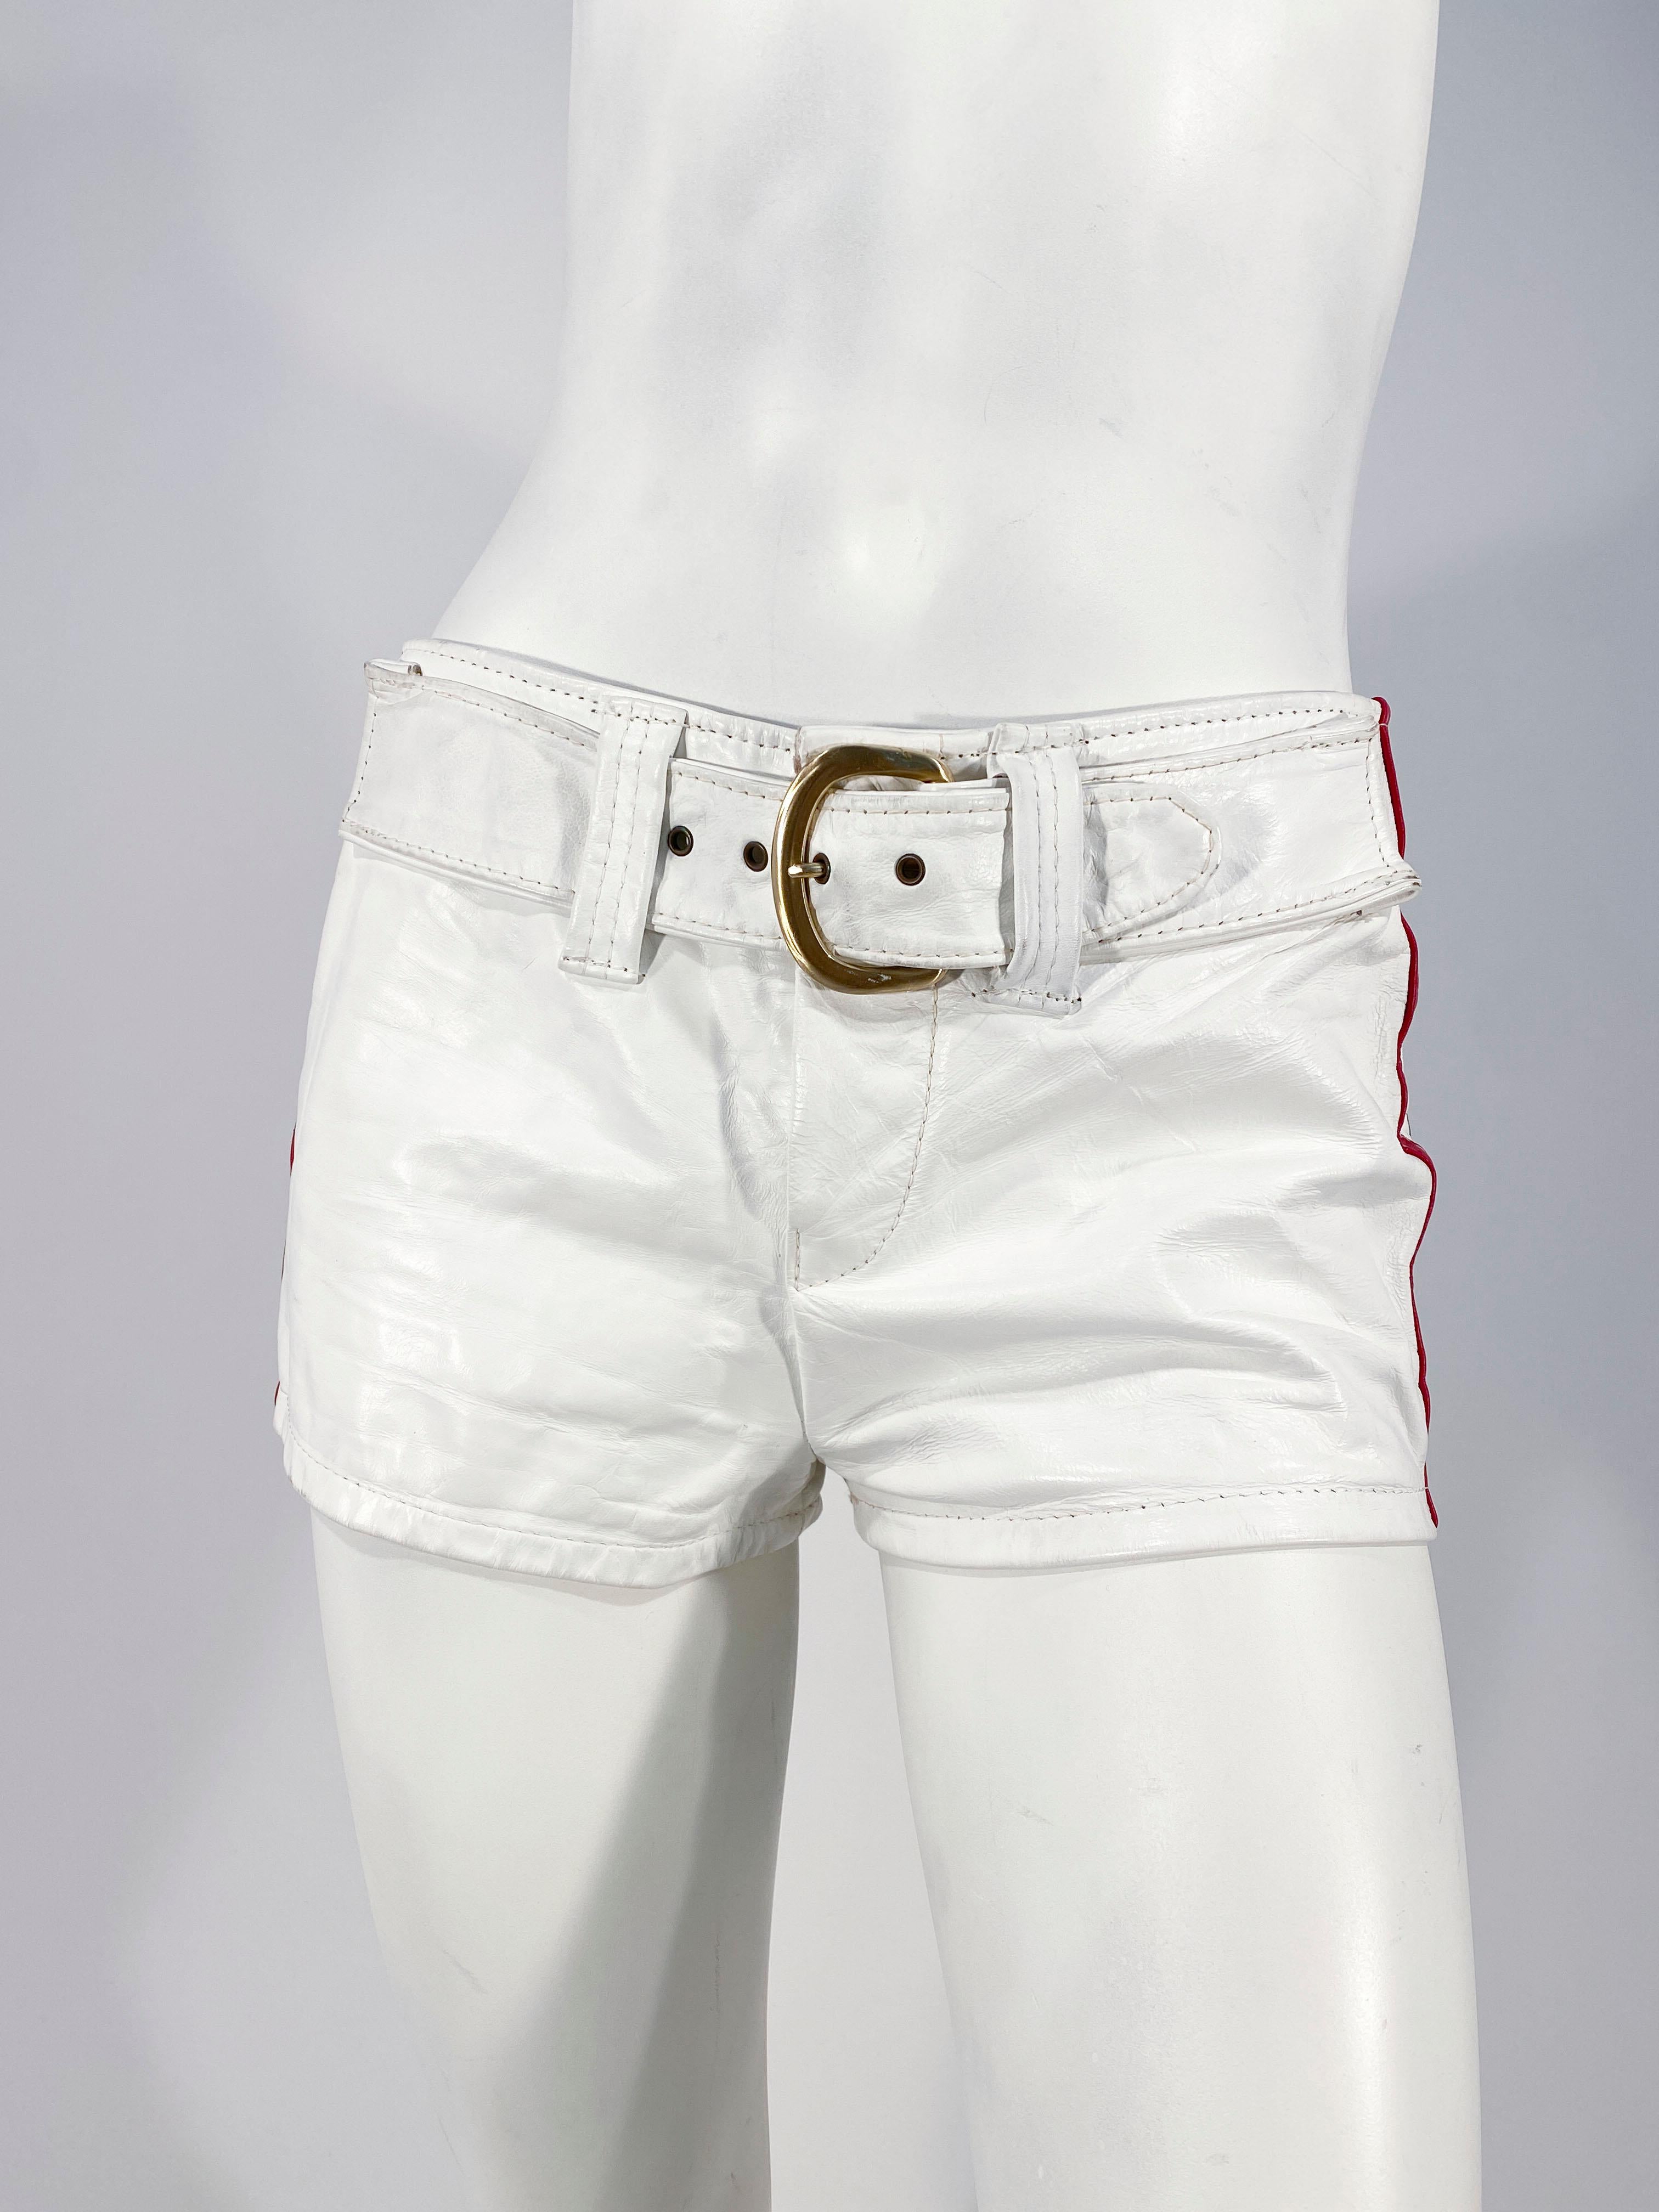 Late 1960s to early 1970s white leather Go-go leisure shorts with Navy blue and read leather stripes on each side finished with white topstitching. The metal zip fly also has a wide applied belt with an oversized bras metal buckle. The entire 